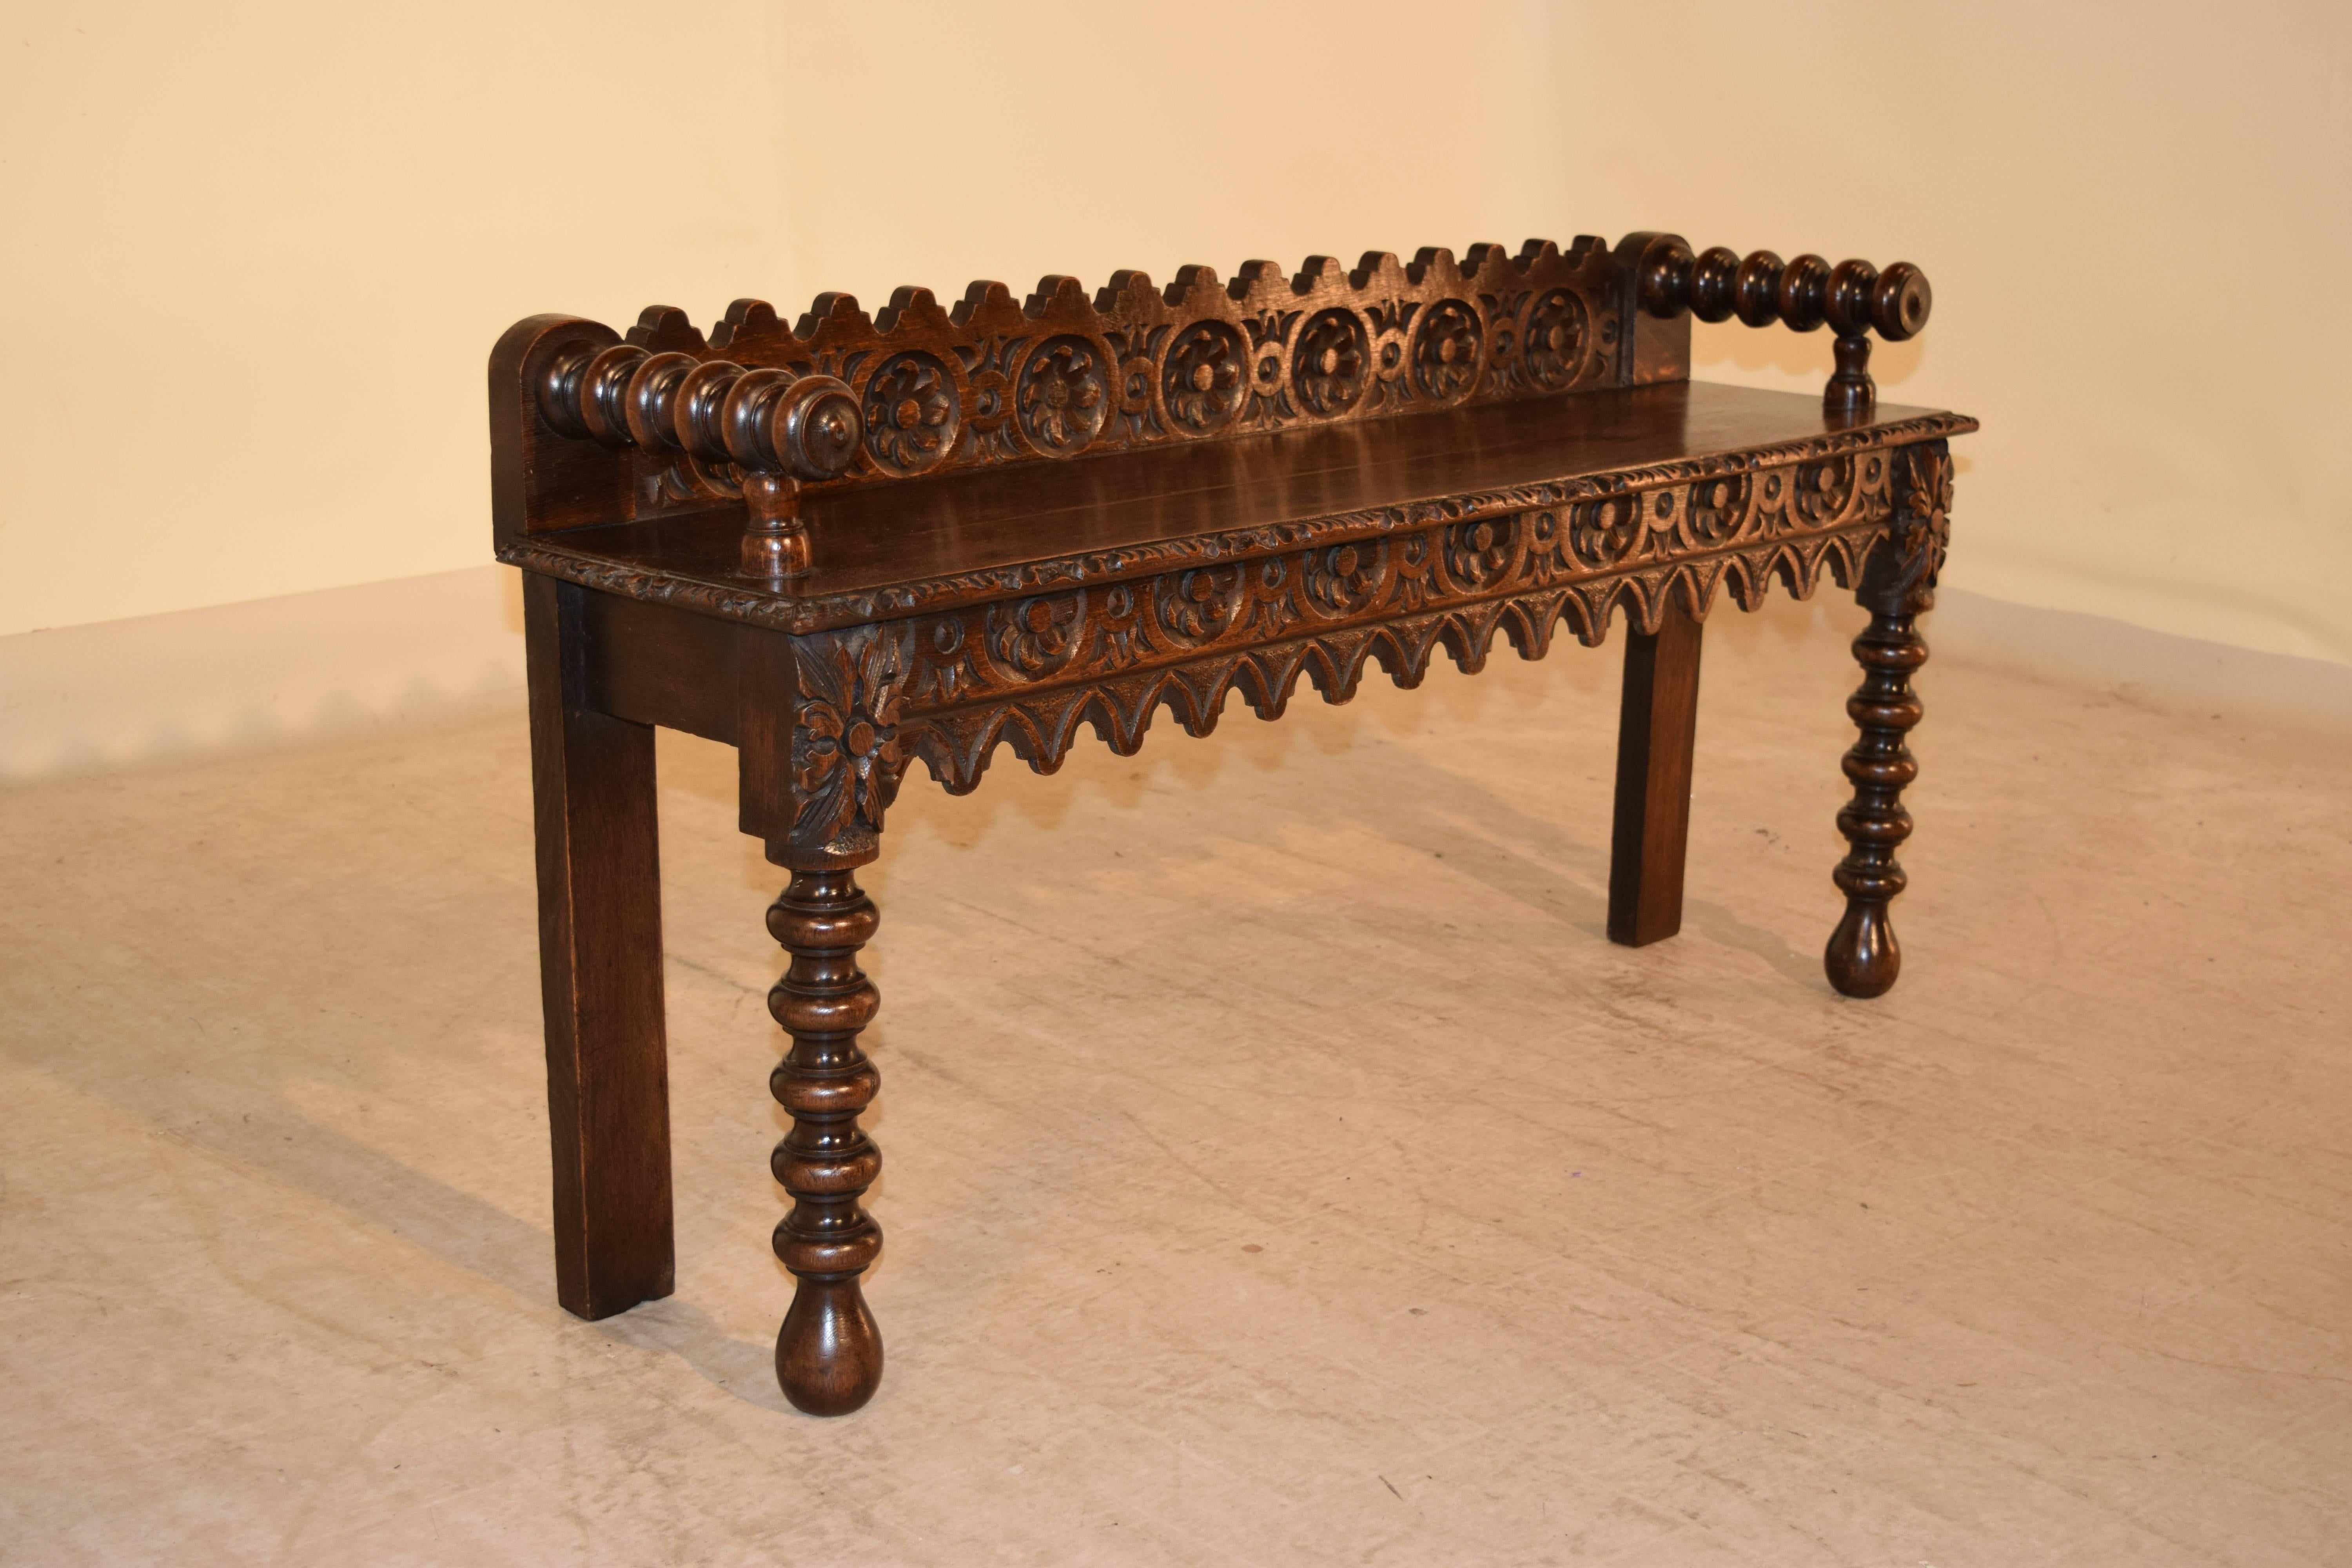 19th century English oak window seat with hand-carved back and apron and hand-turned arms and front legs. Seat, 19.25